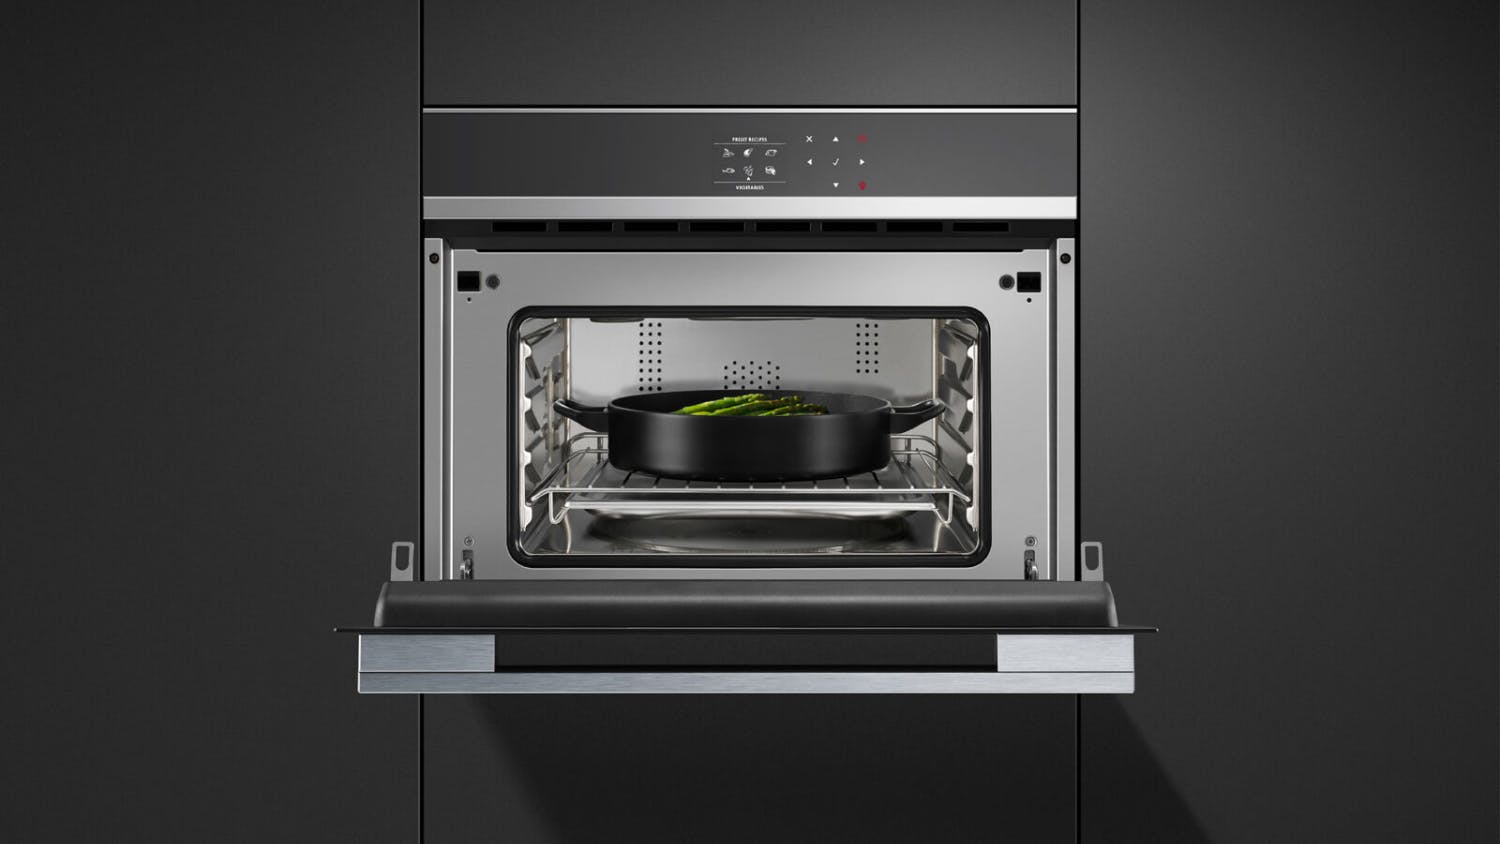 Fisher & Paykel 37L 9 Function Combination Built-In Microwave Oven - Black (Series 9/OM60NDB1)